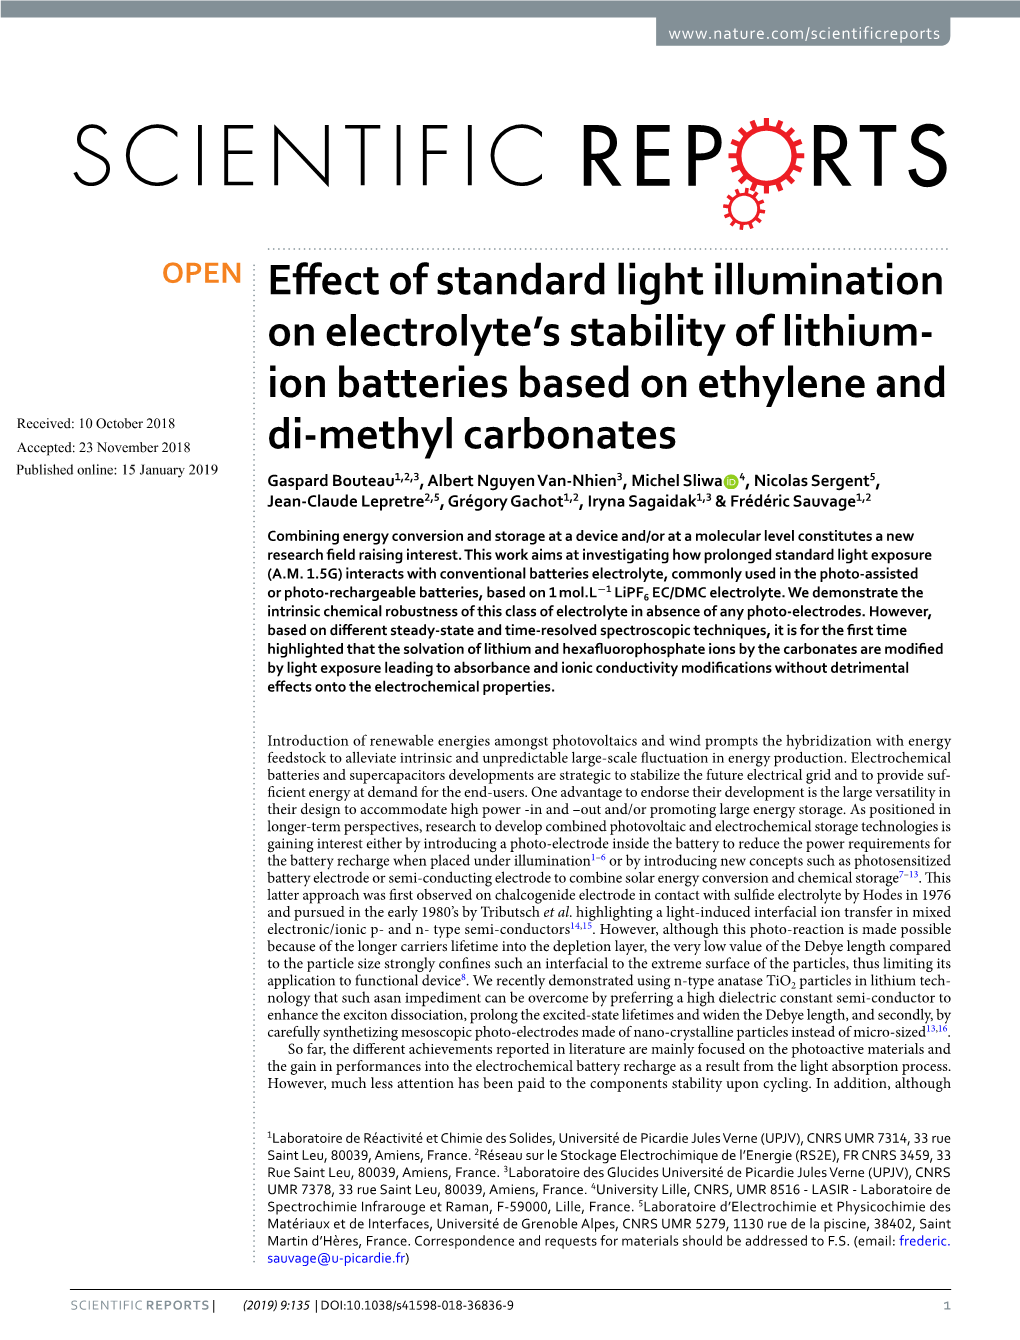 Effect of Standard Light Illumination on Electrolyte's Stability of Lithium-Ion